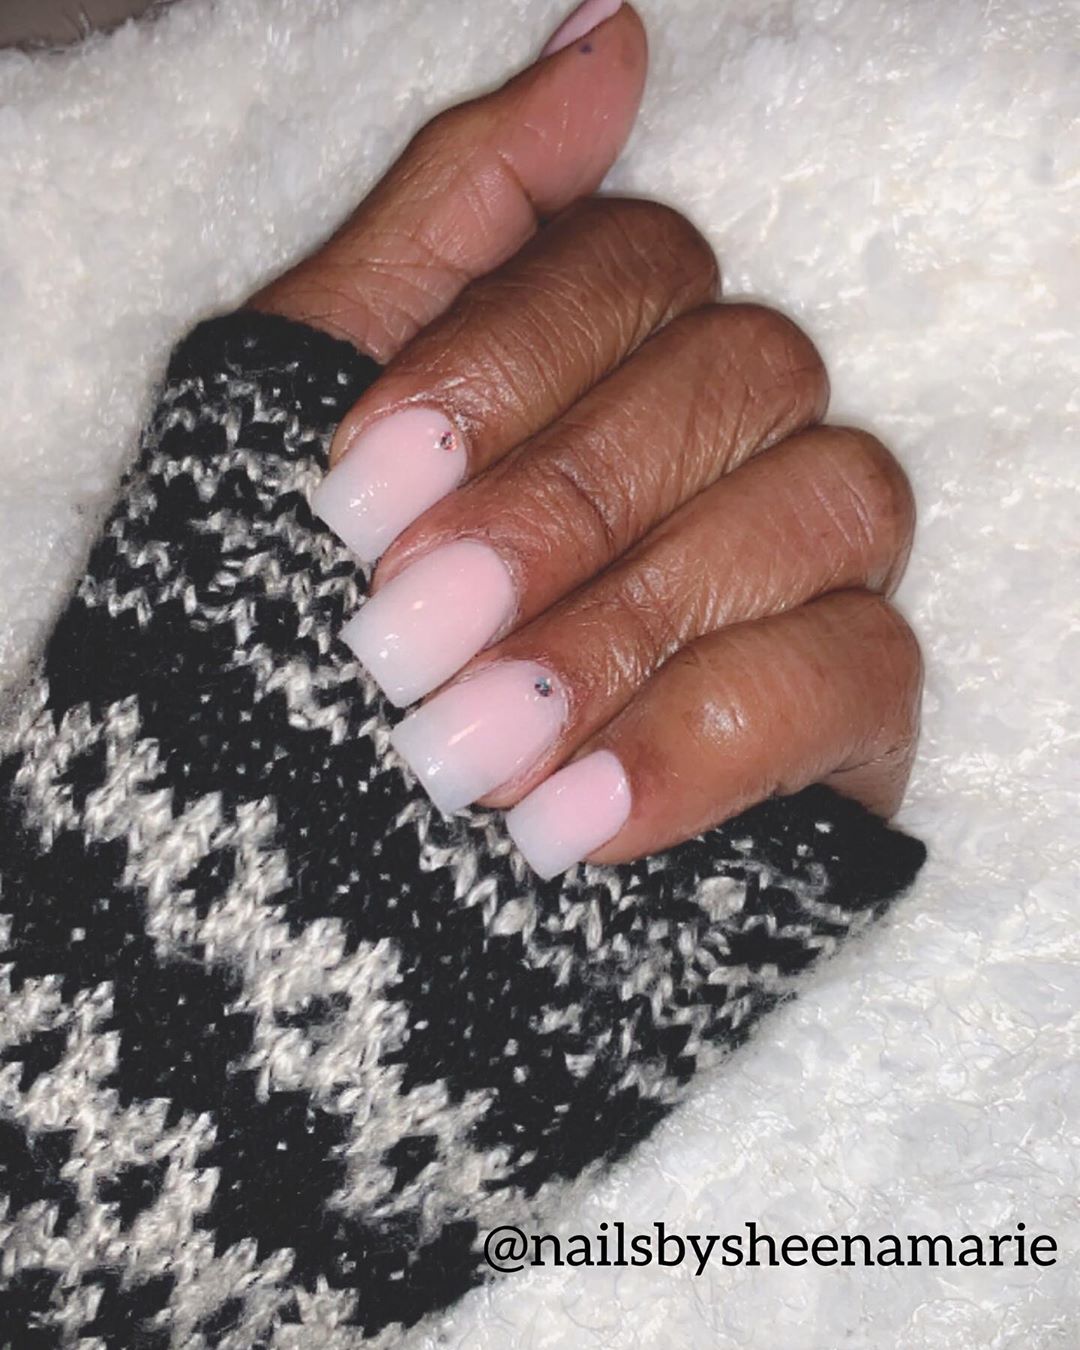 Gorgeous image of ombre french tips to inspire your next manicure